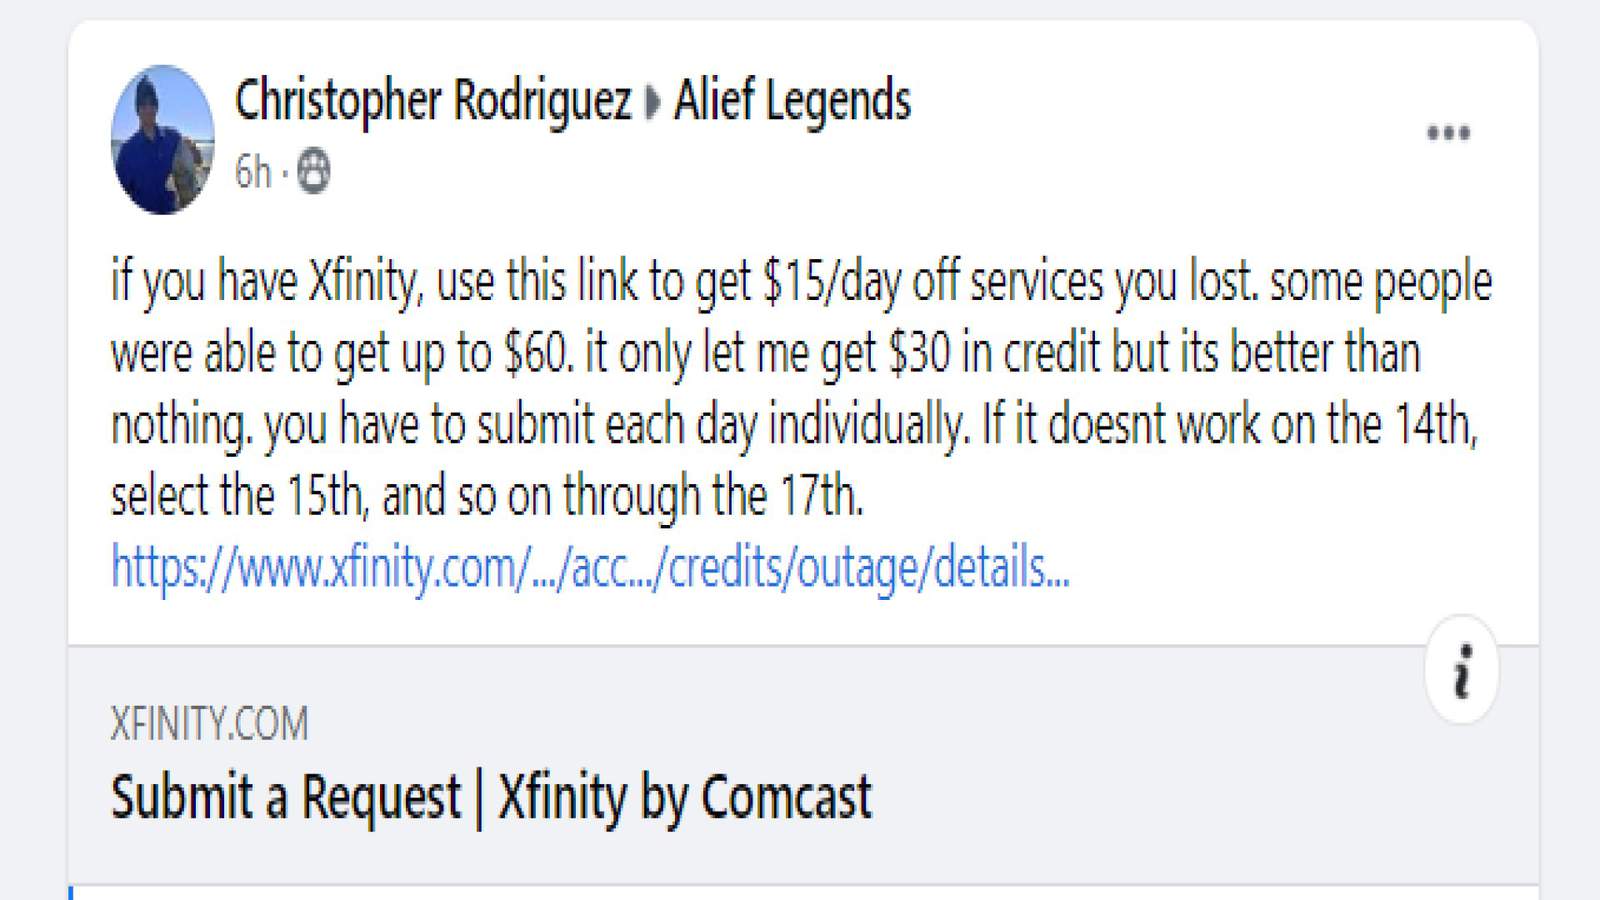 Can you get a credit or refund for cable and internet service you couldn’t use when power was out?